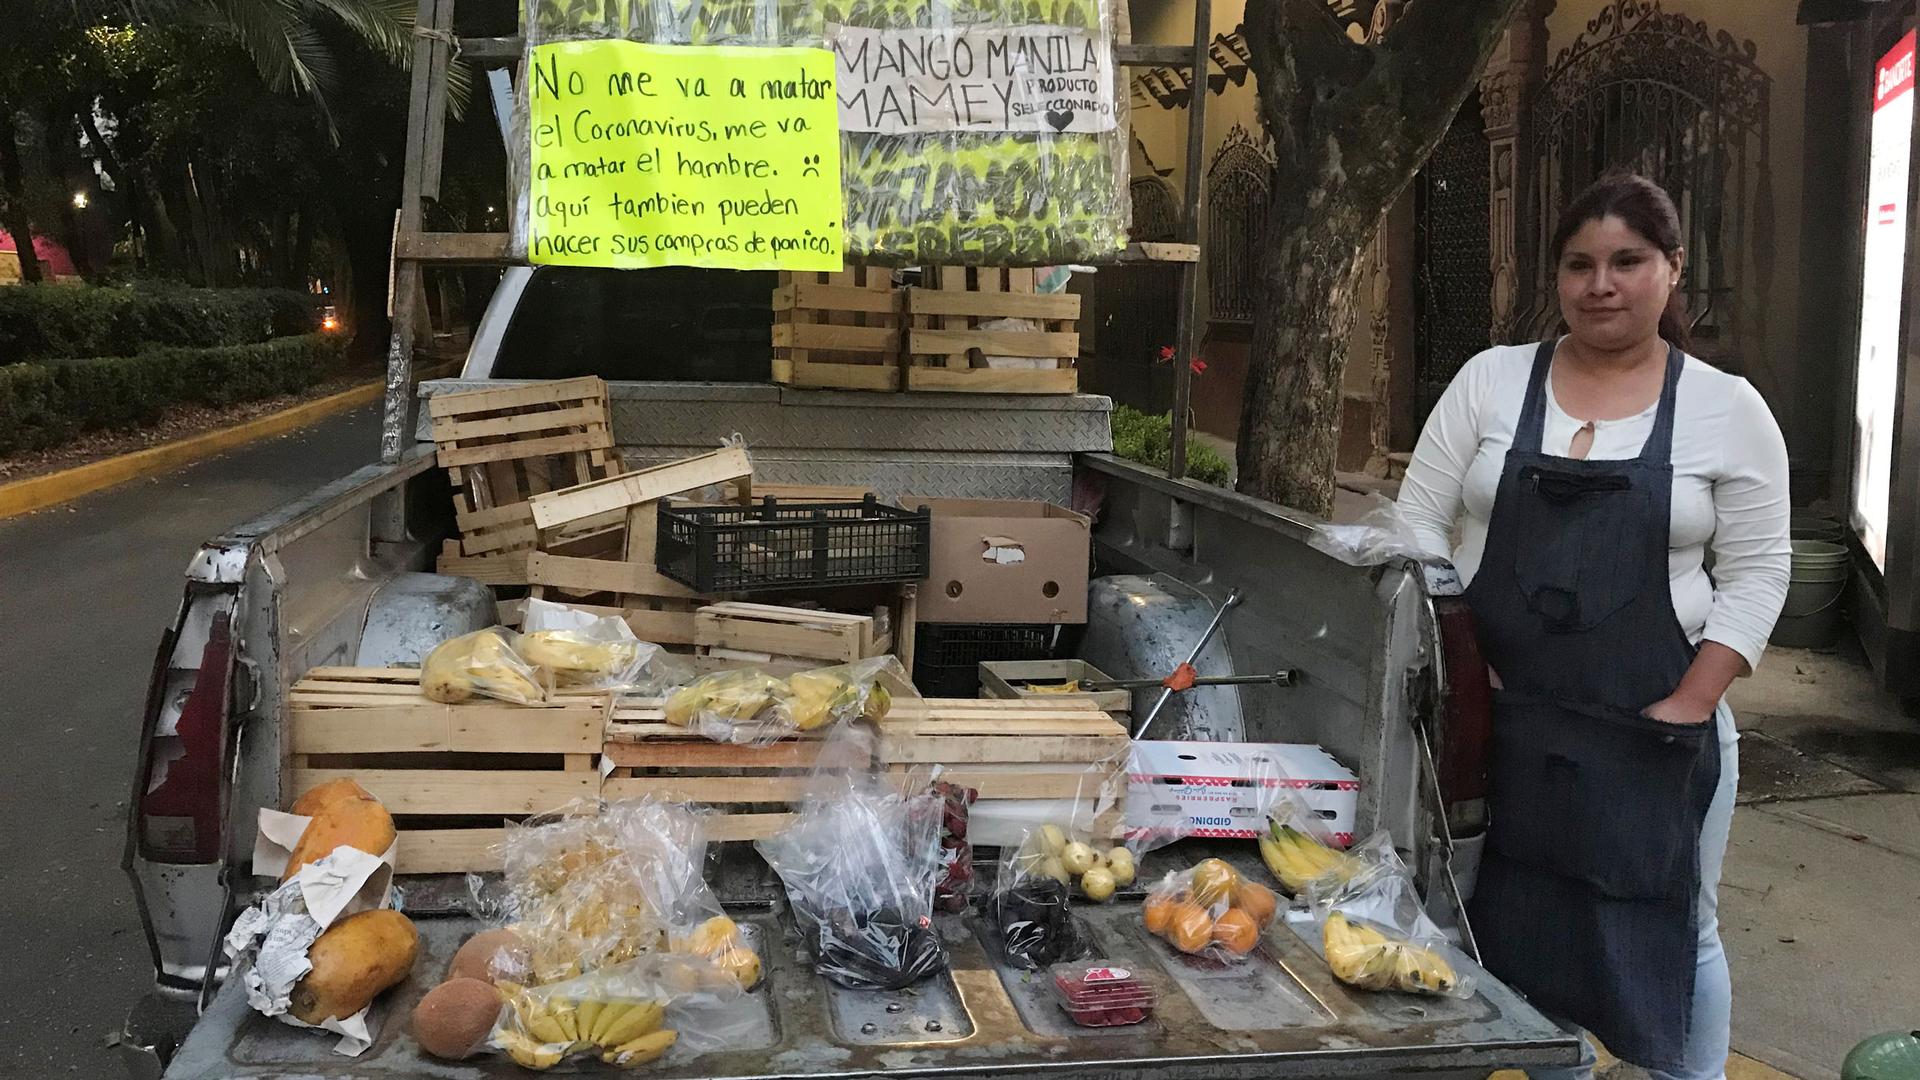 A woman stands by a display of fruit